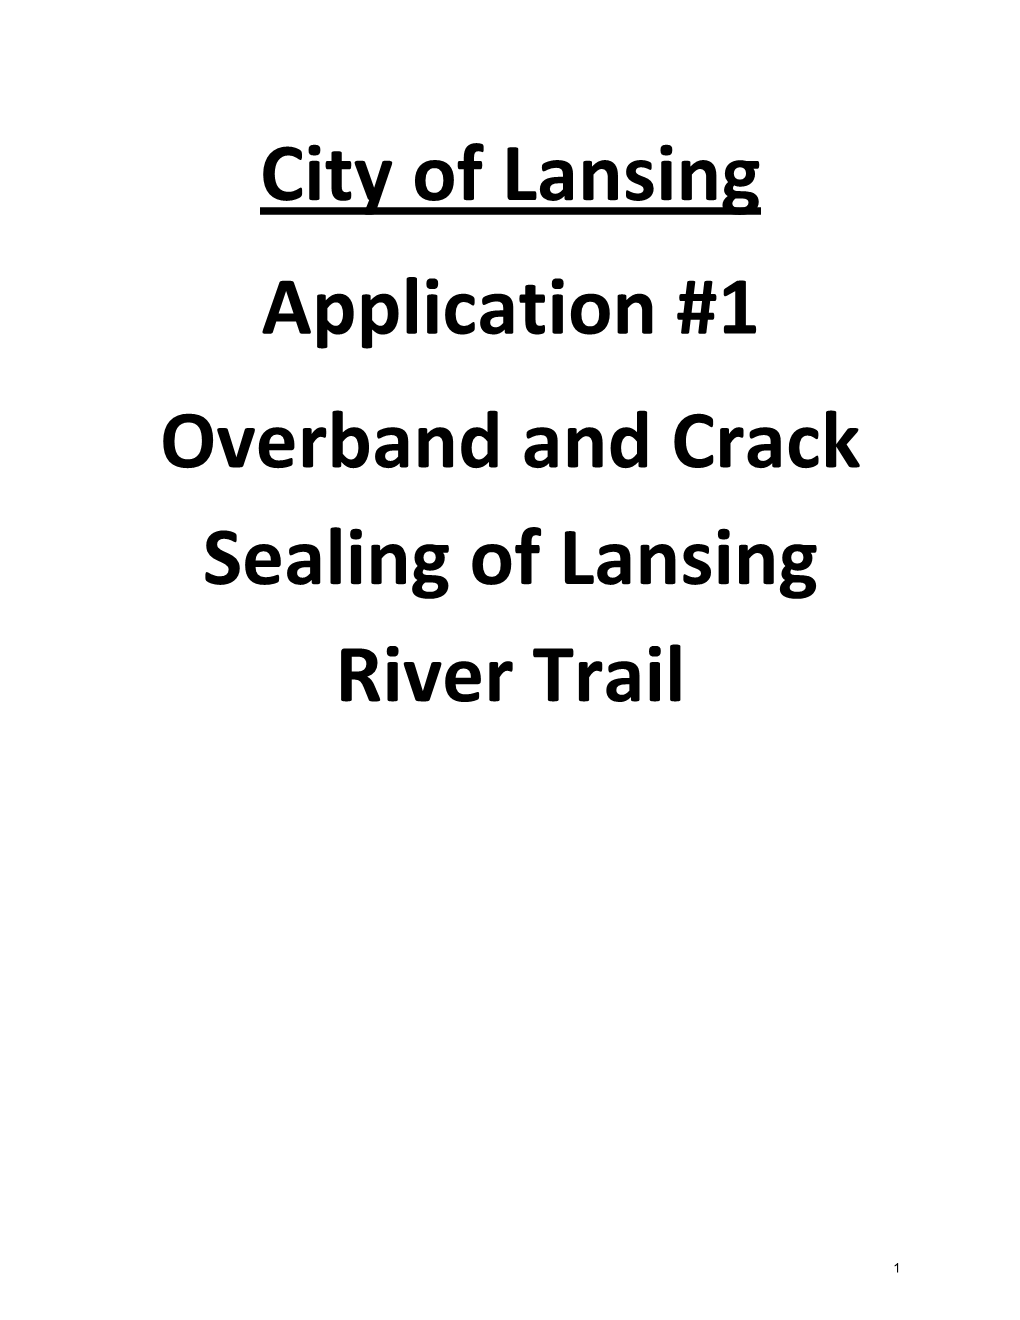 City of Lansing Application #1 Overband and Crack Sealing of Lansing River Trail